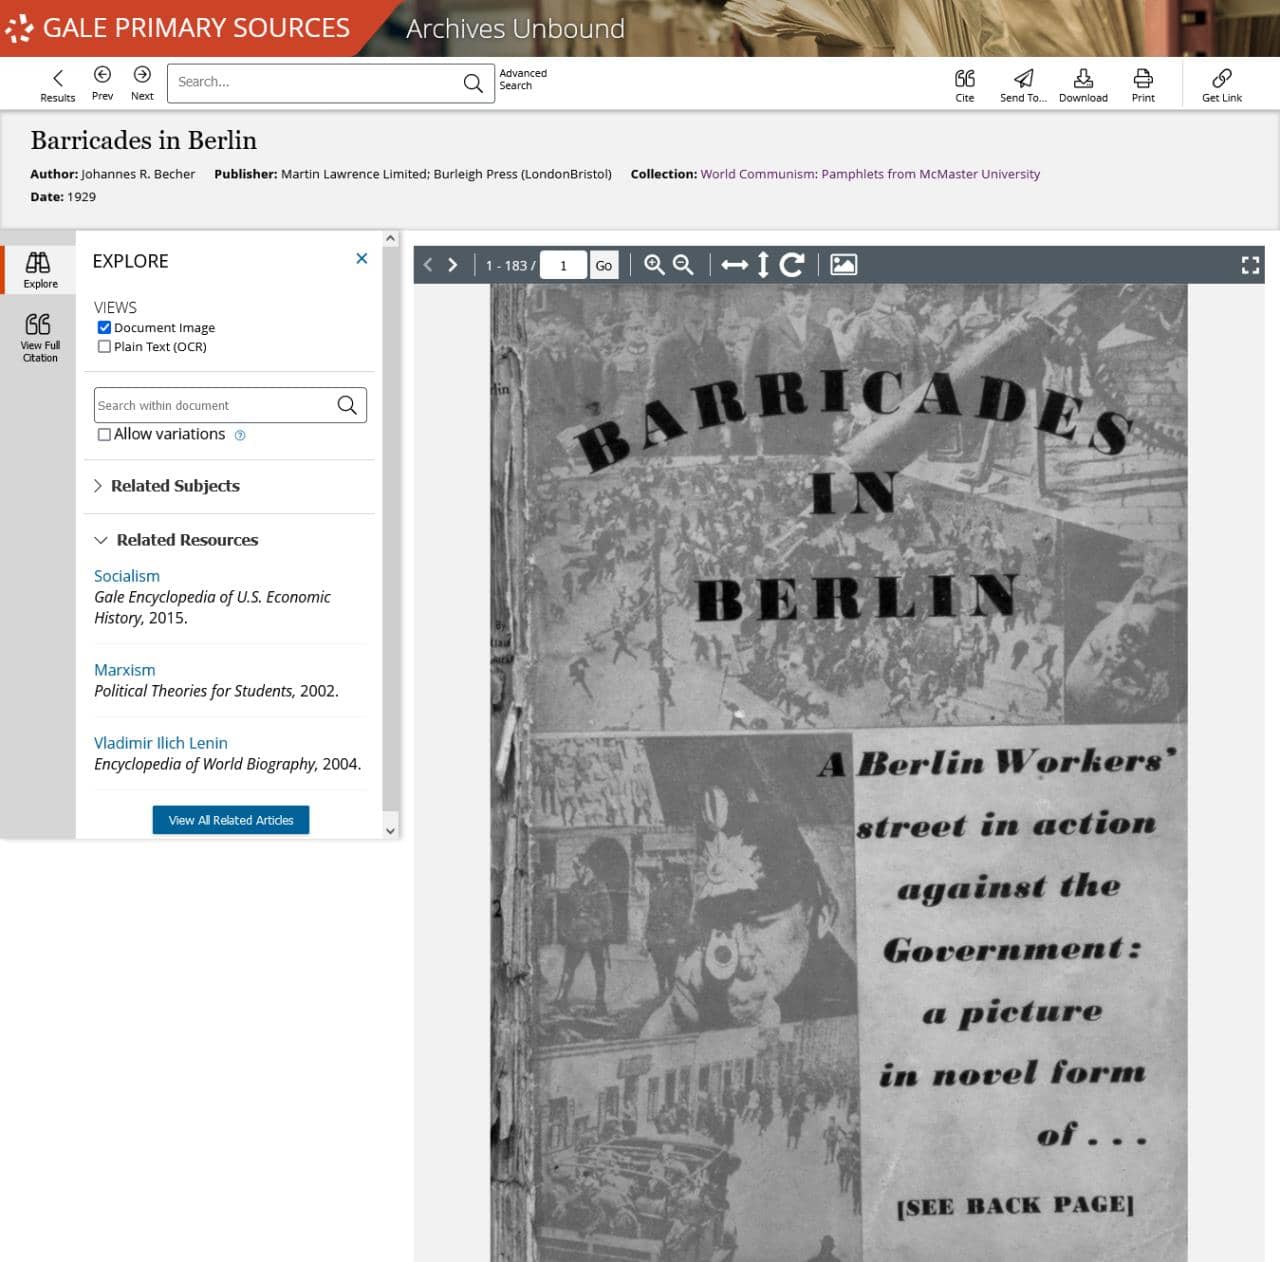 Becher, Johannes R. Barricades in Berlin. Martin Lawrence Limited; Burleigh Press, May 1929.